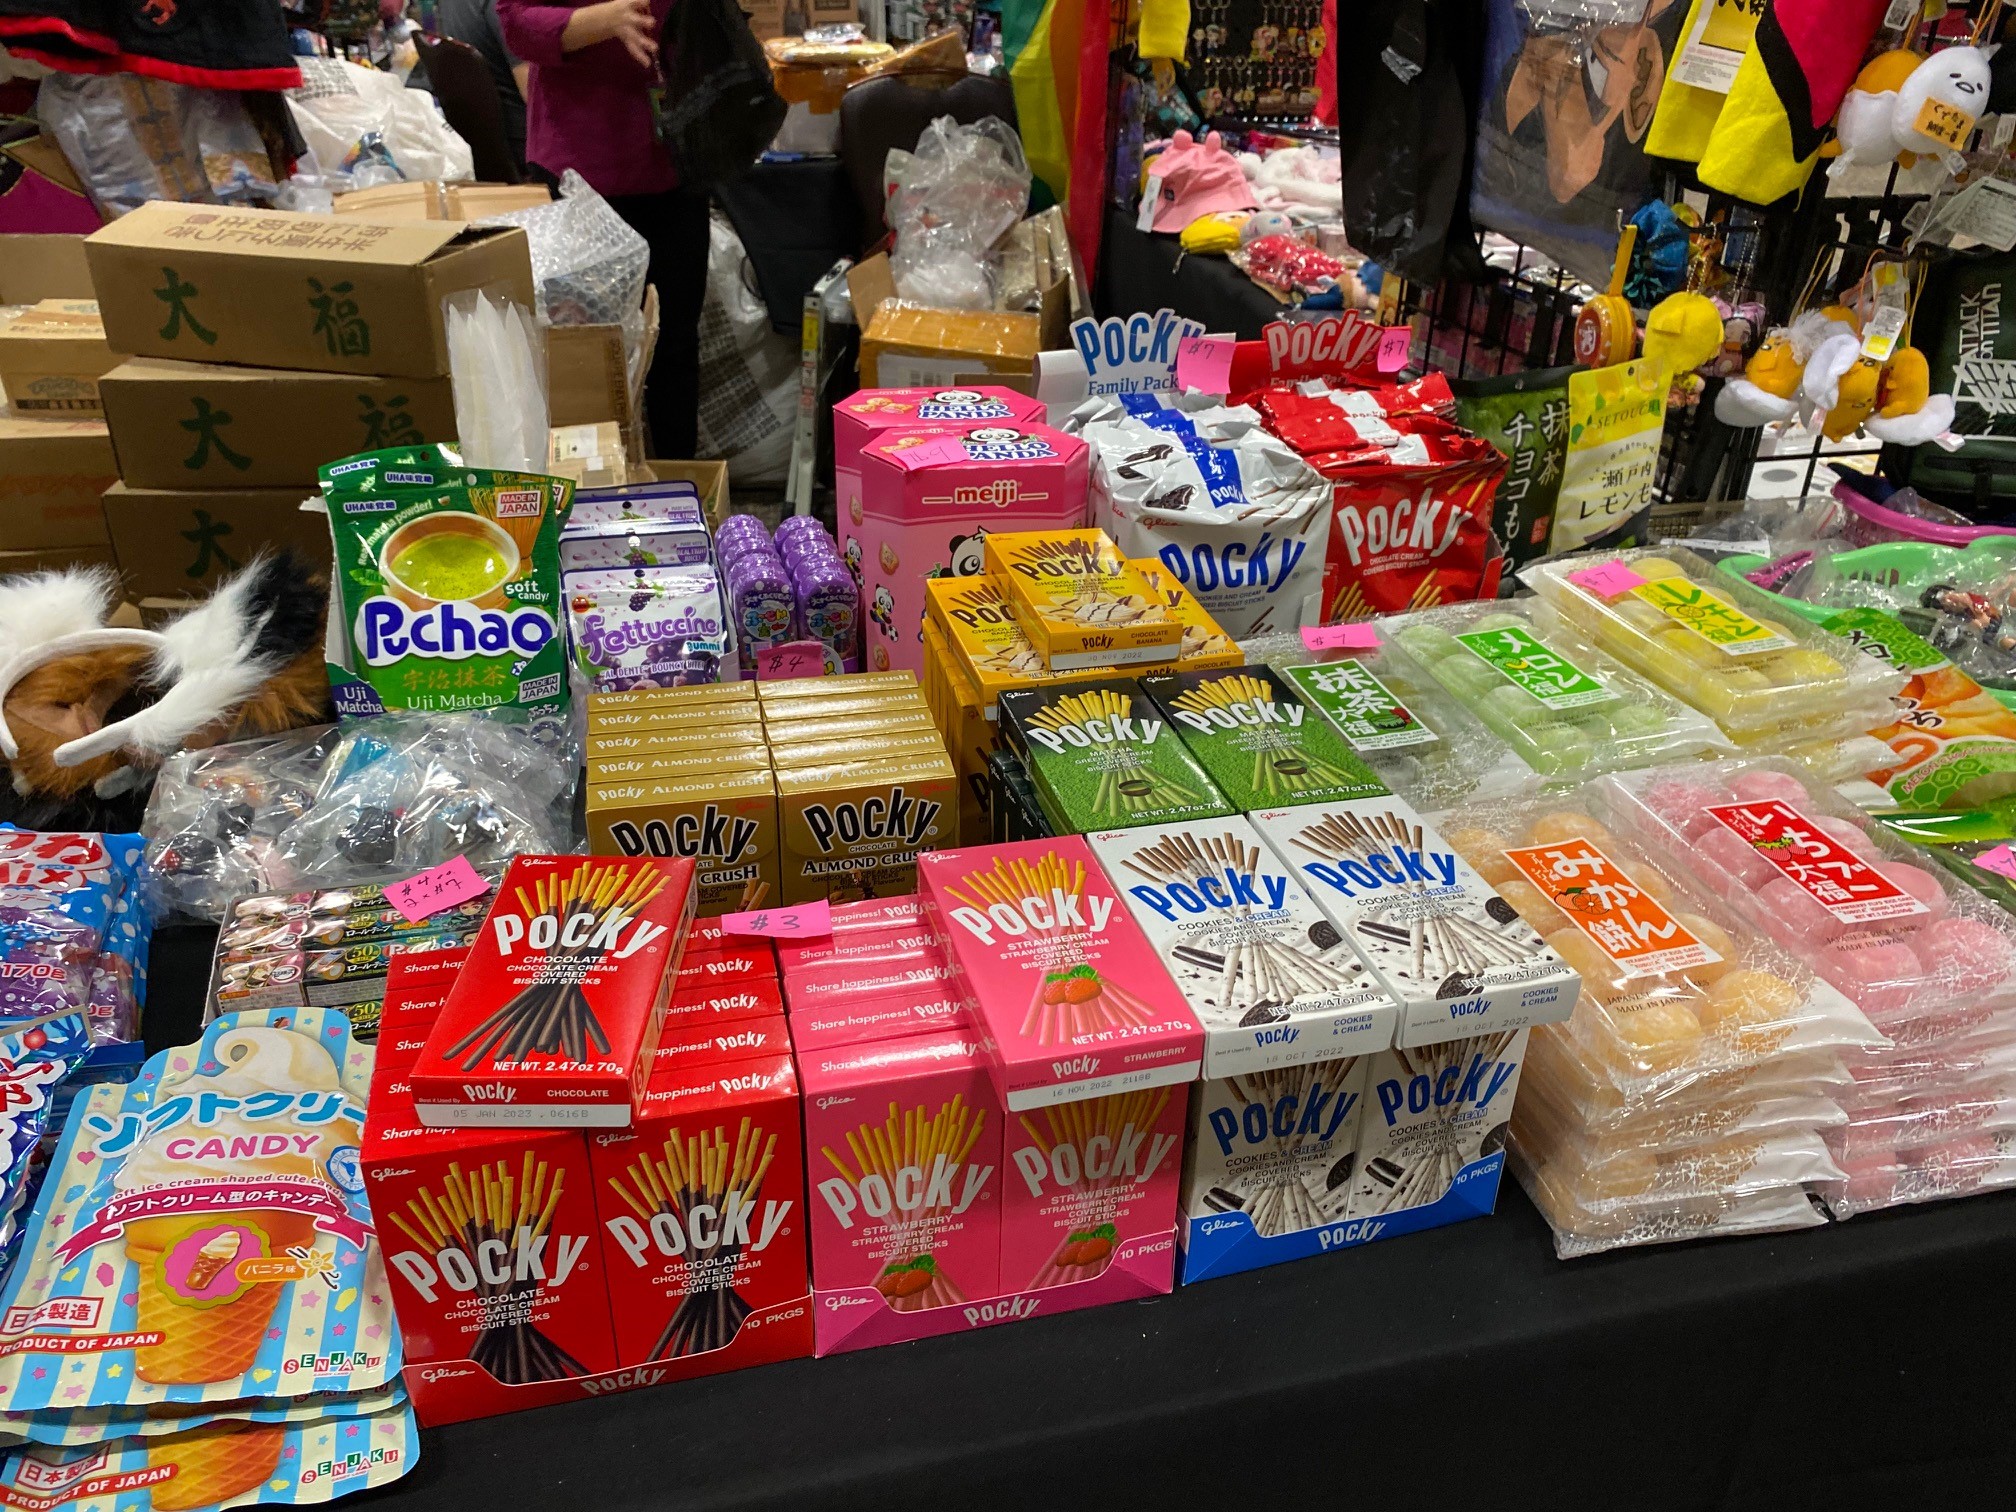 A very small sample of the wide variety of Japanese snacks available to purchase from the many vendors at Colossal Con